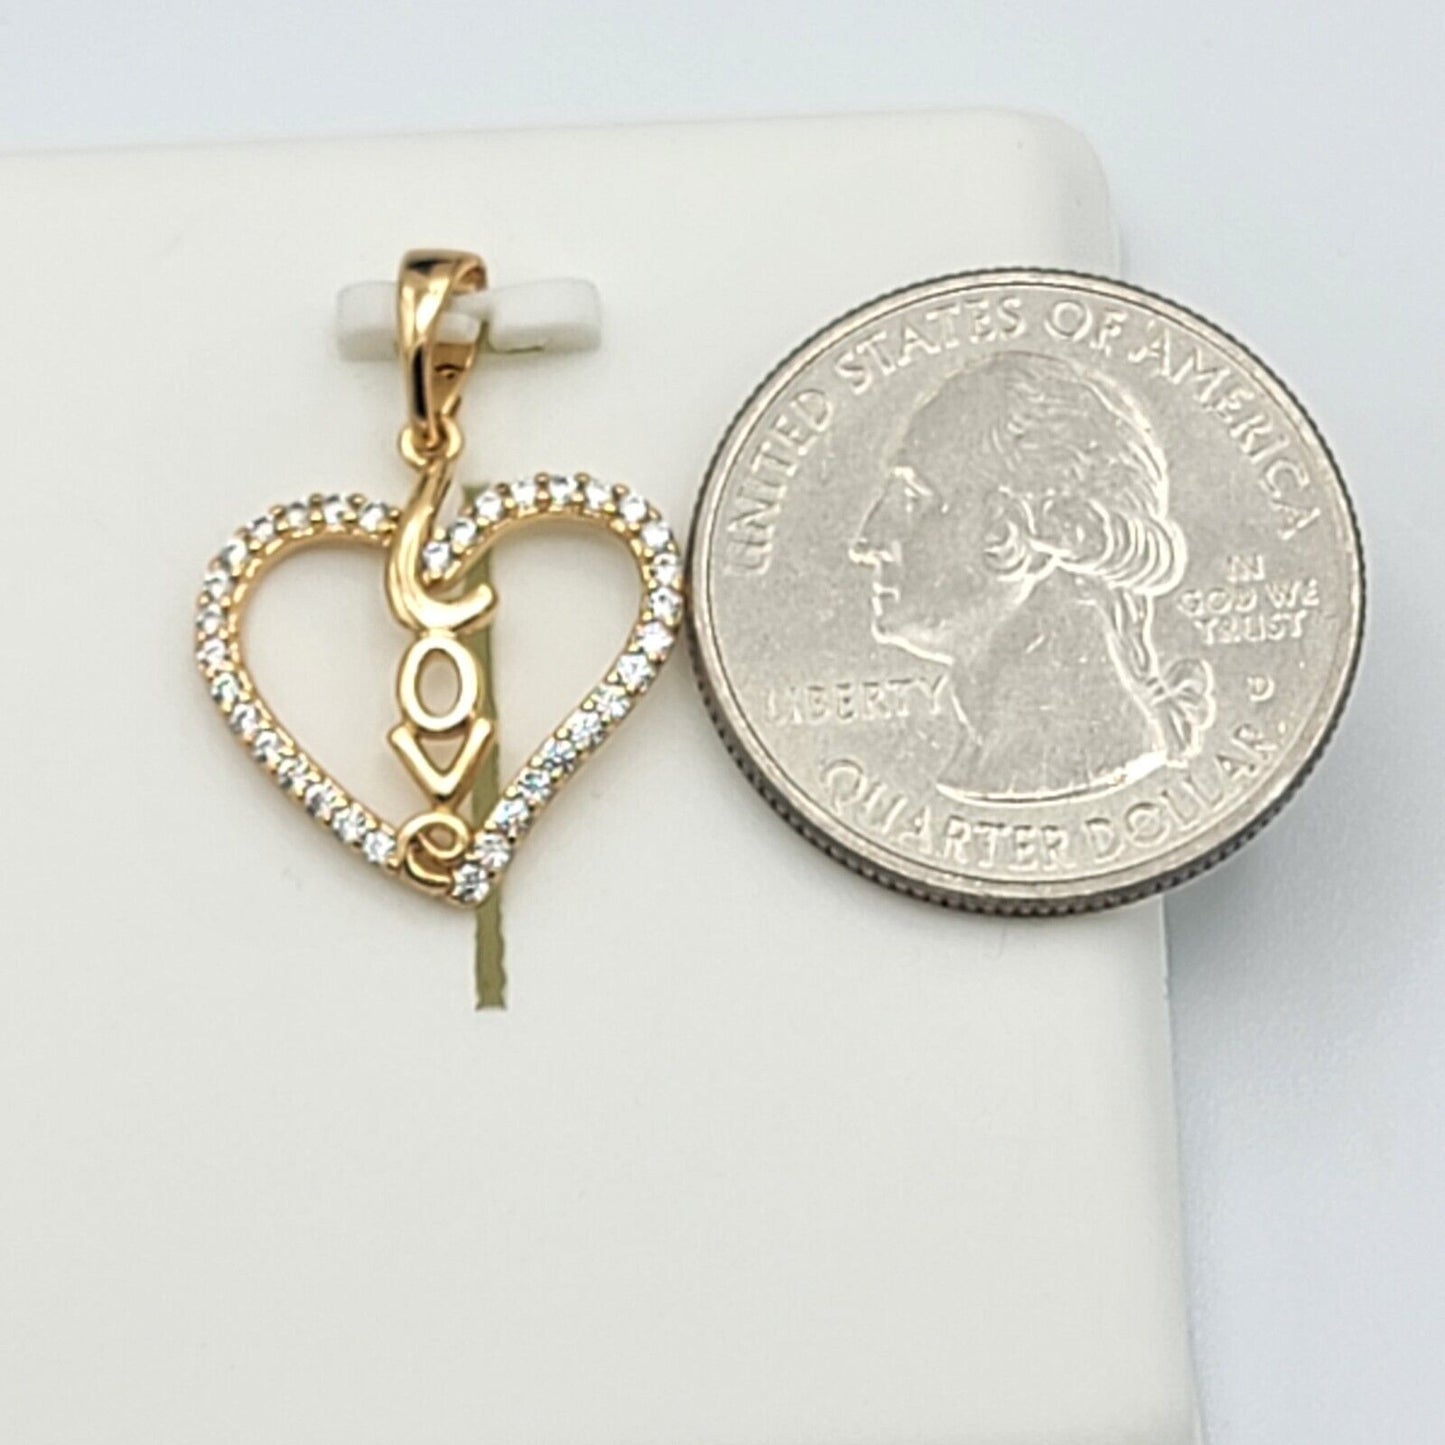 Necklaces - 18K Gold Plated. CZ Heart LOVE Pendant & Chain.